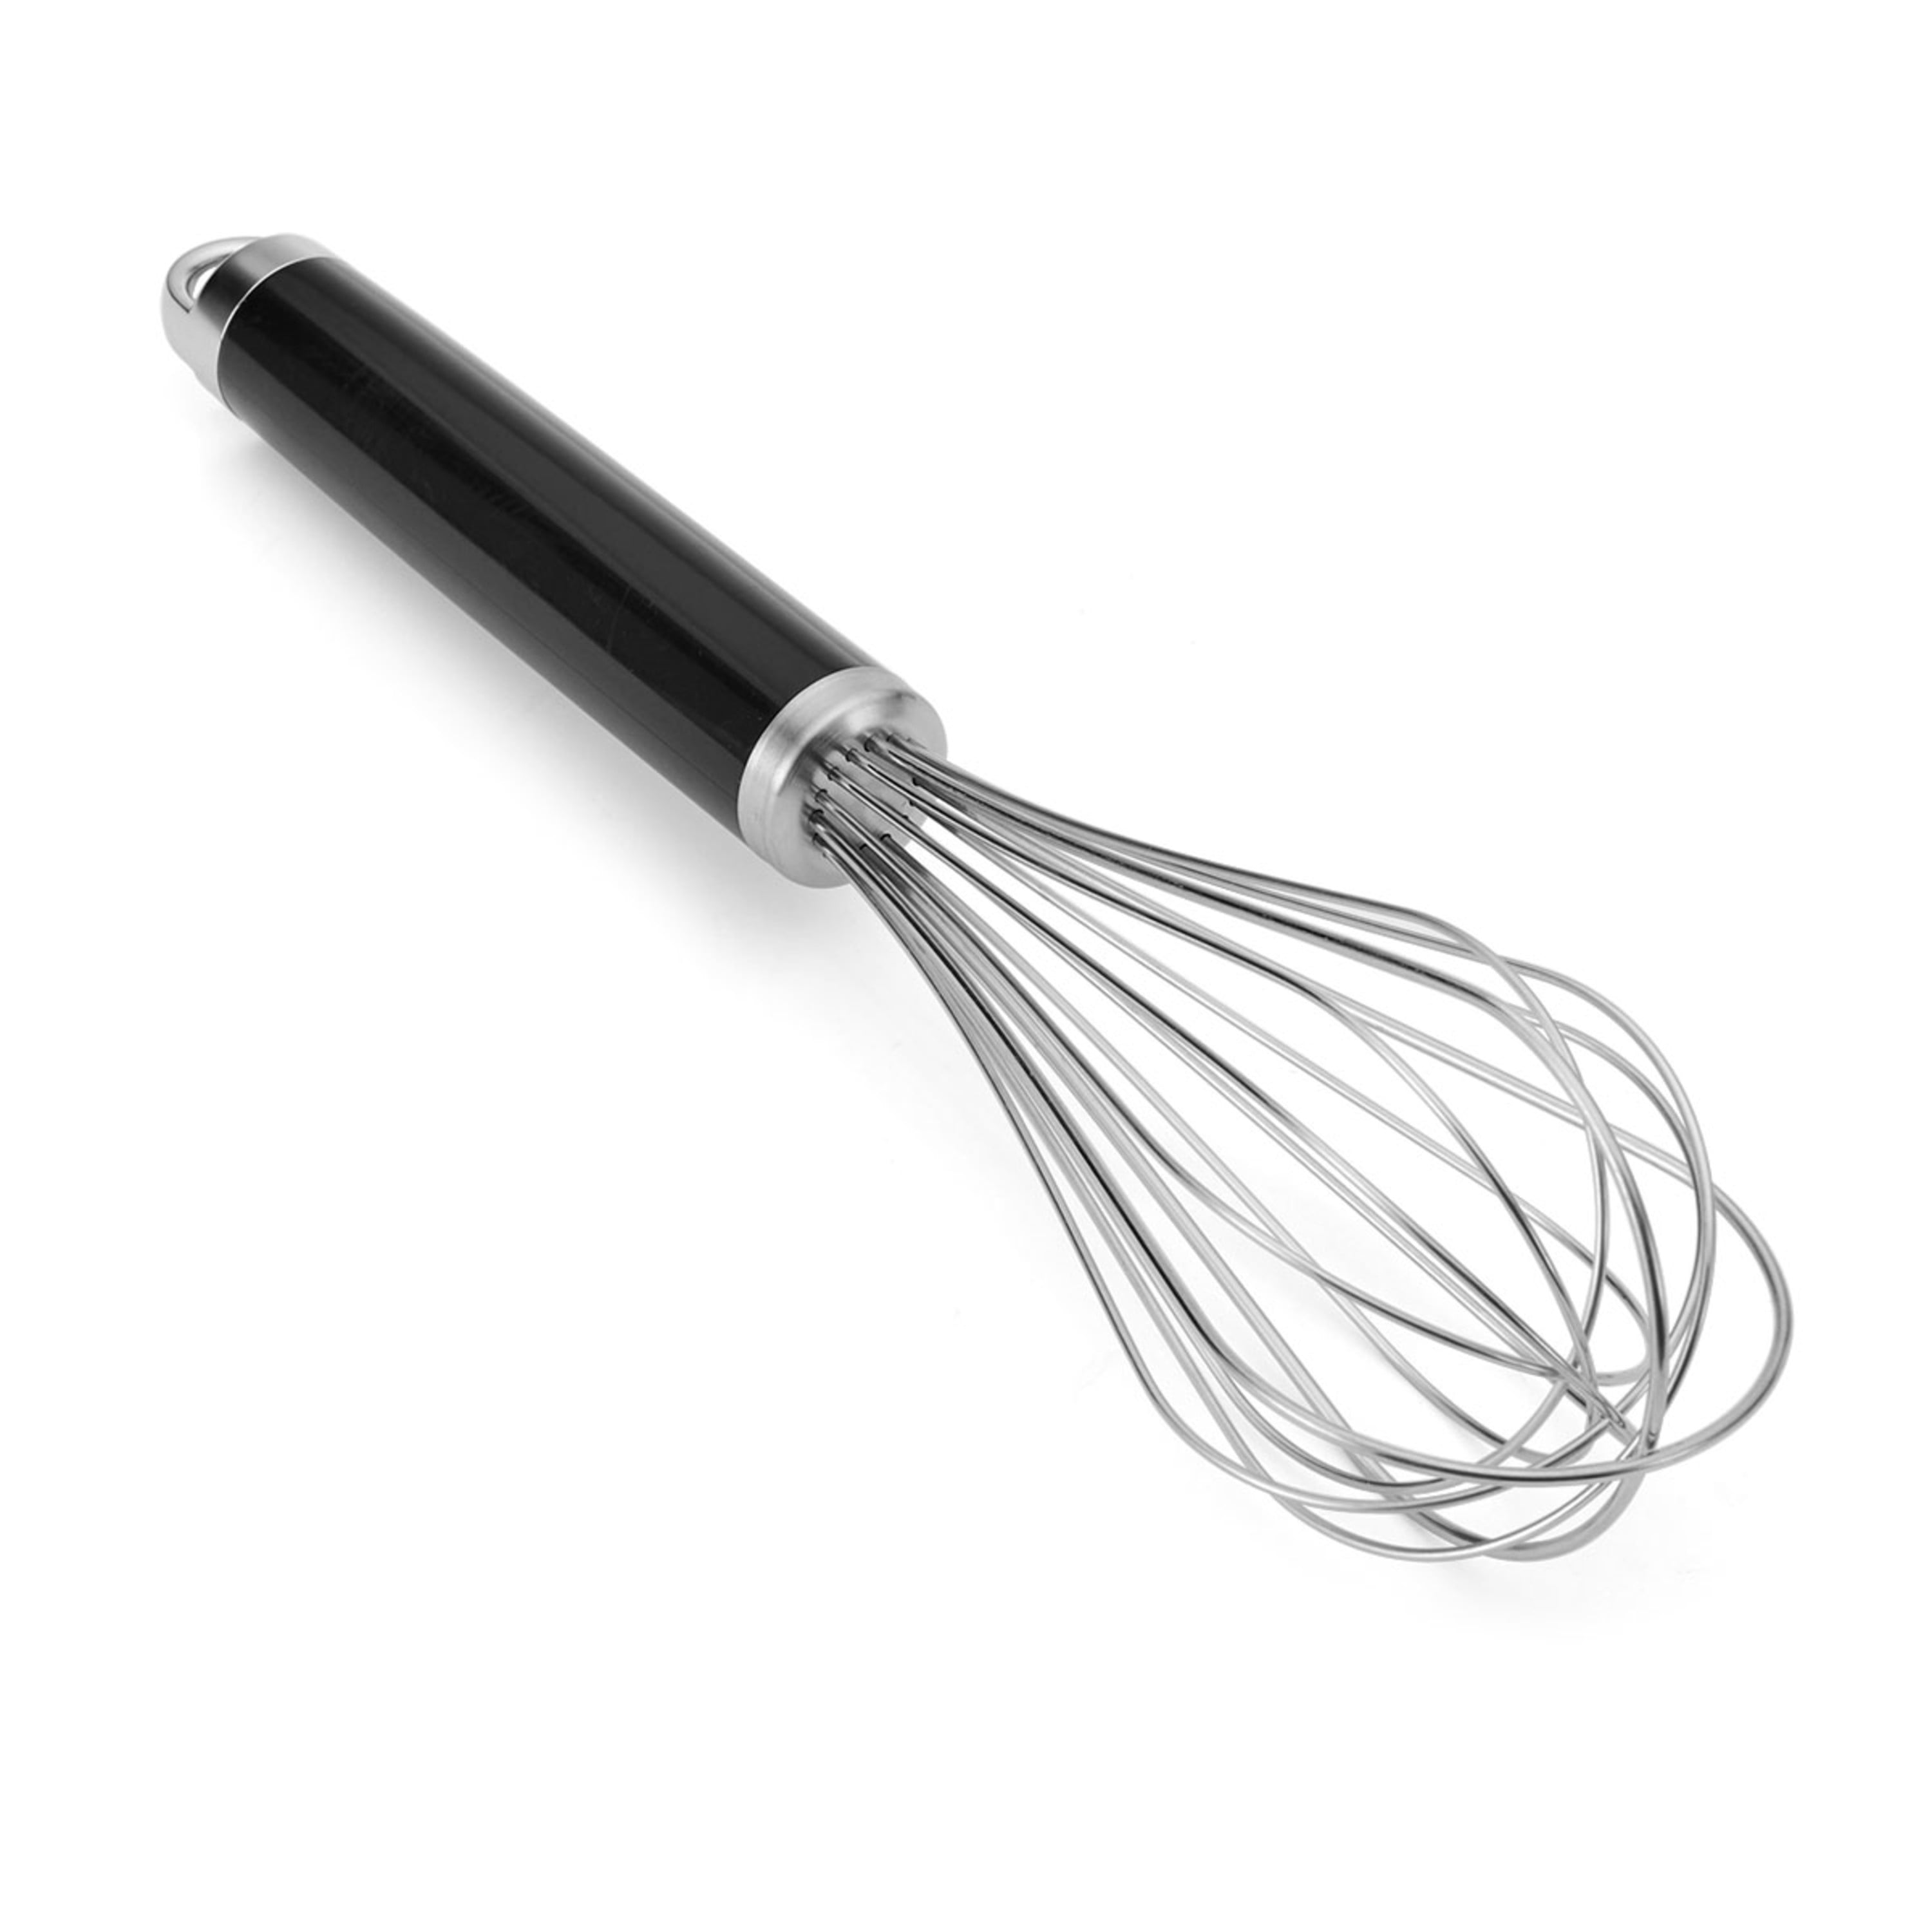 Semi-Automatic Whisk - Stainless Steel – The Convenient Kitchen